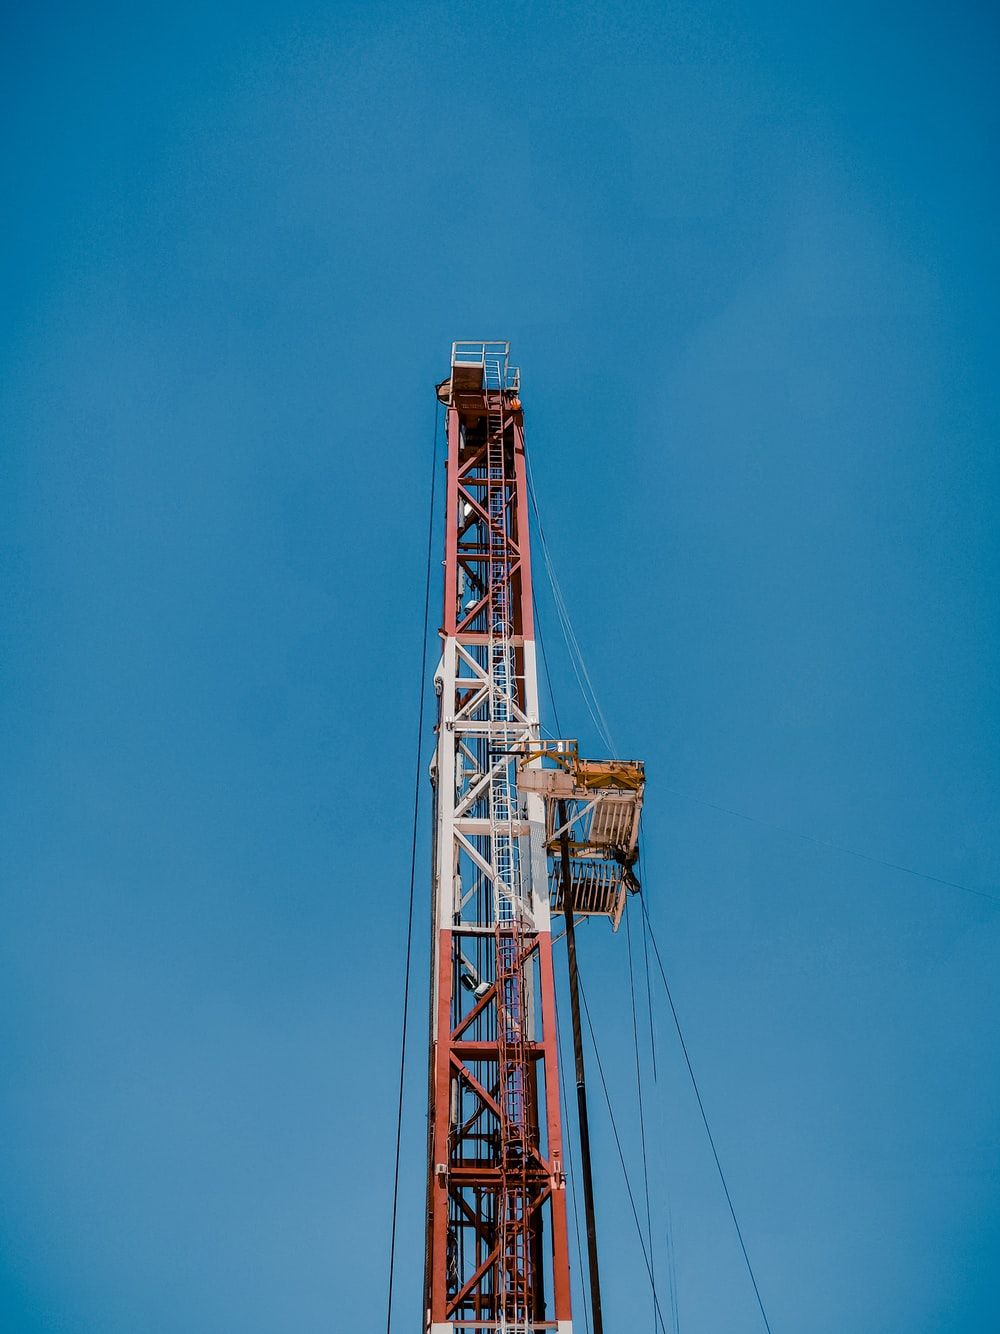 Oilfield Picture. Download Free Image